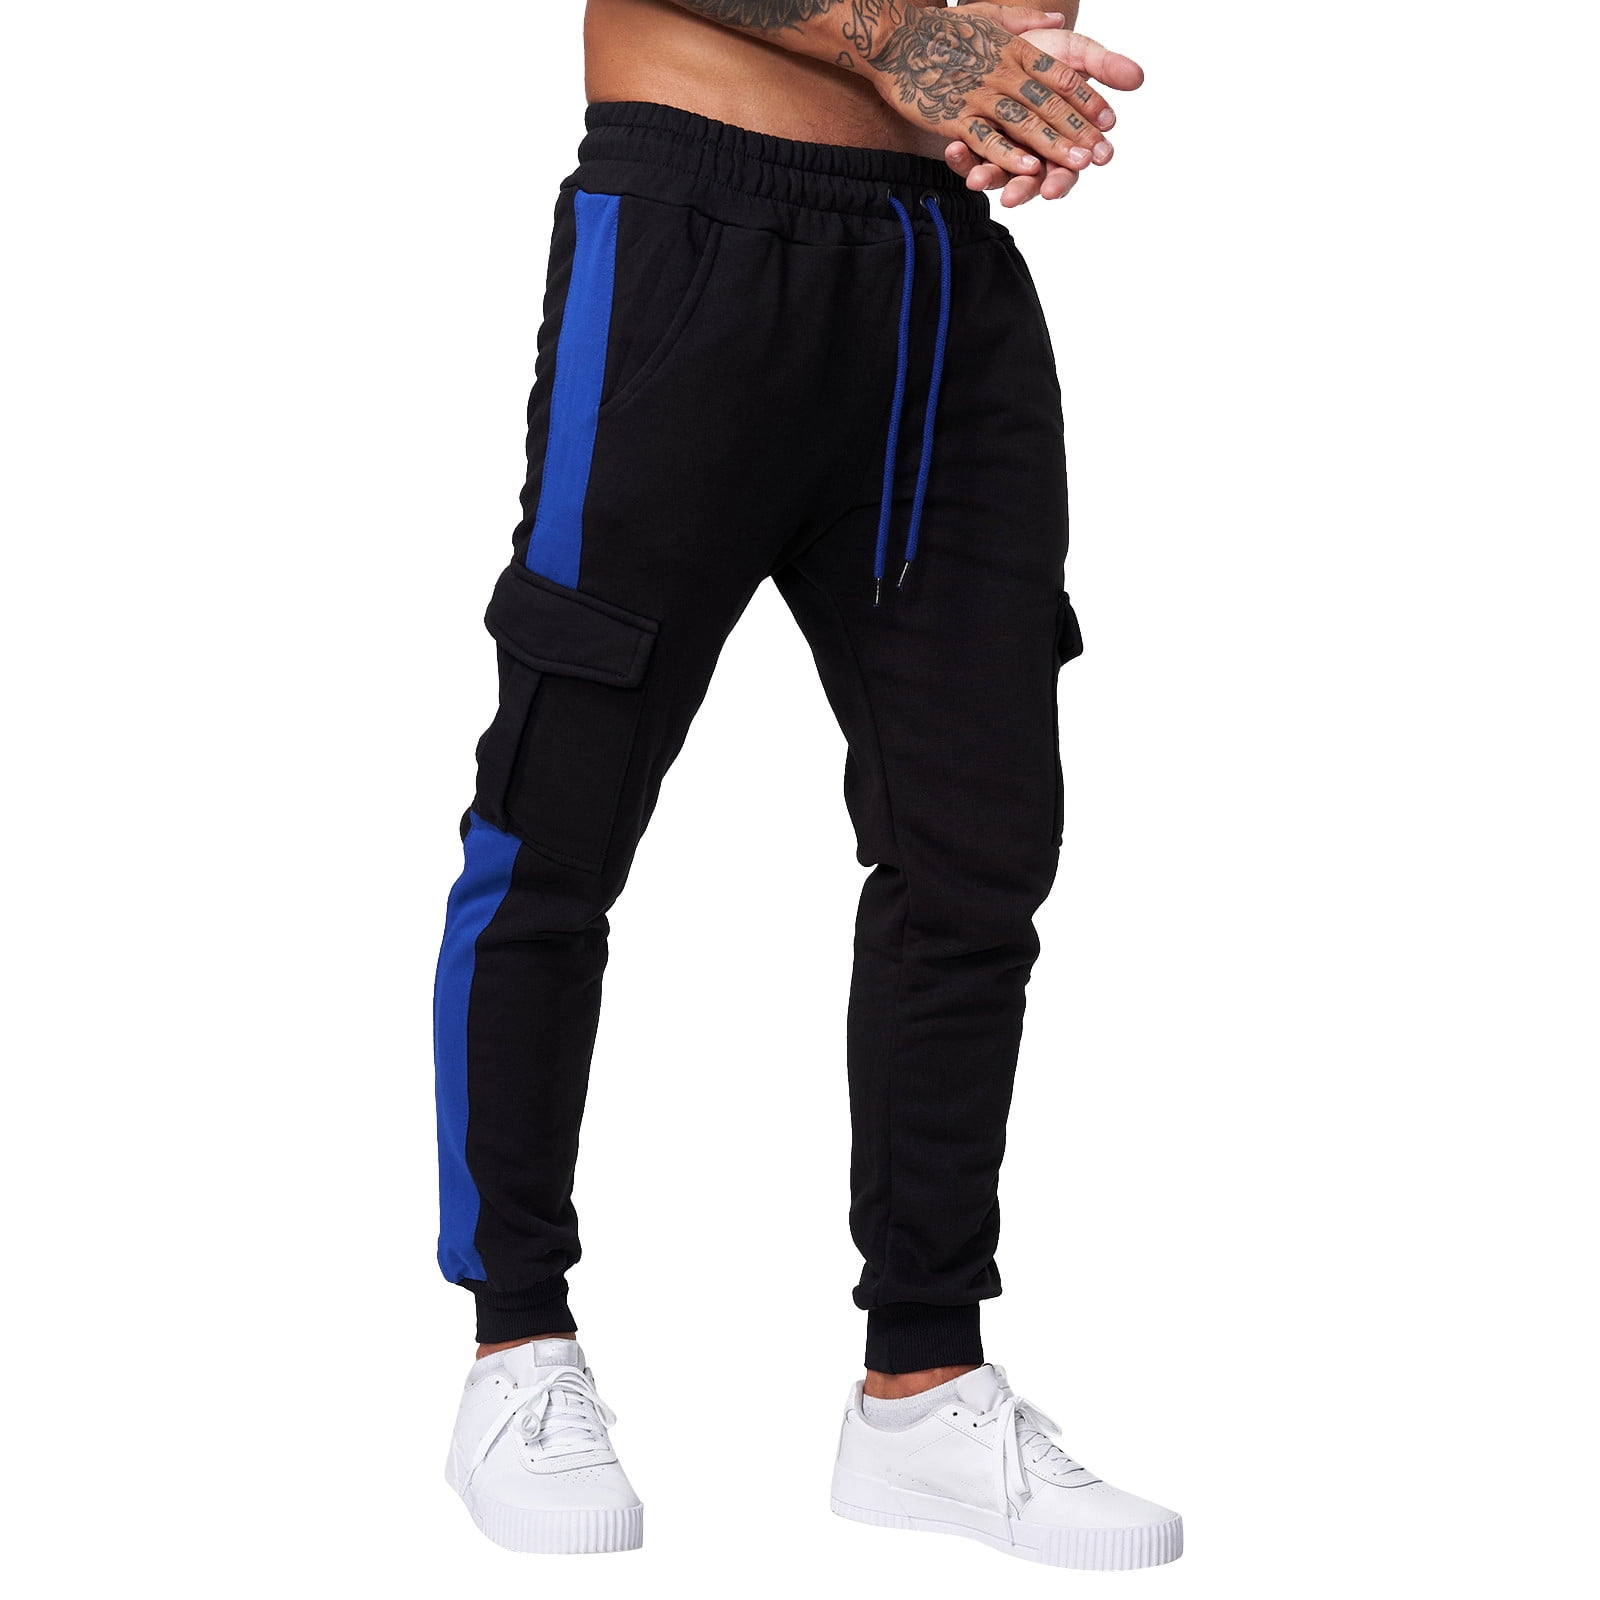 WILLBEST Athletic Pants for Men with Pockets Men's Sweatpants Loose Fit ...